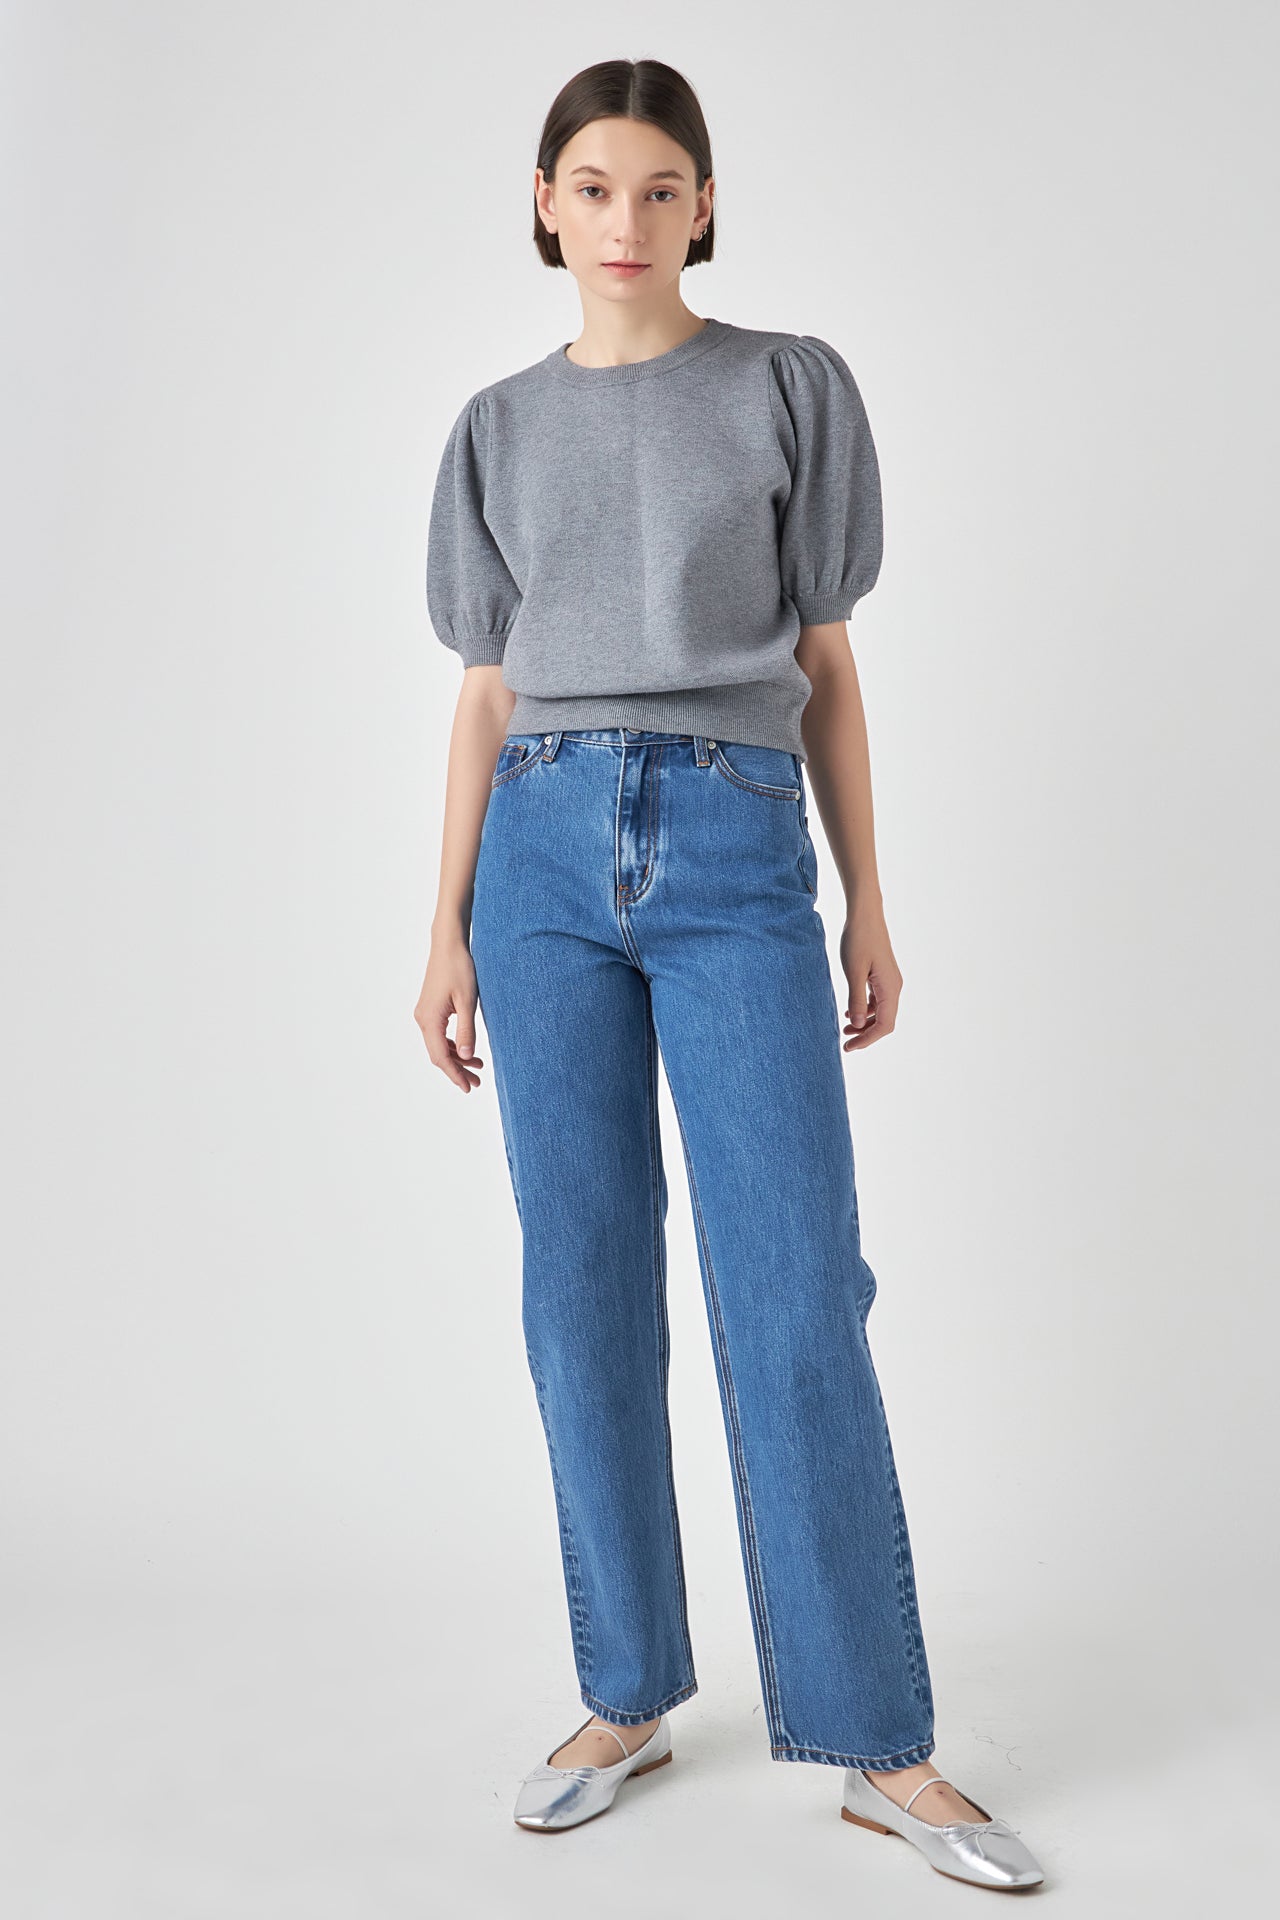 Short Puff Sleeve Knit Top – English Factory